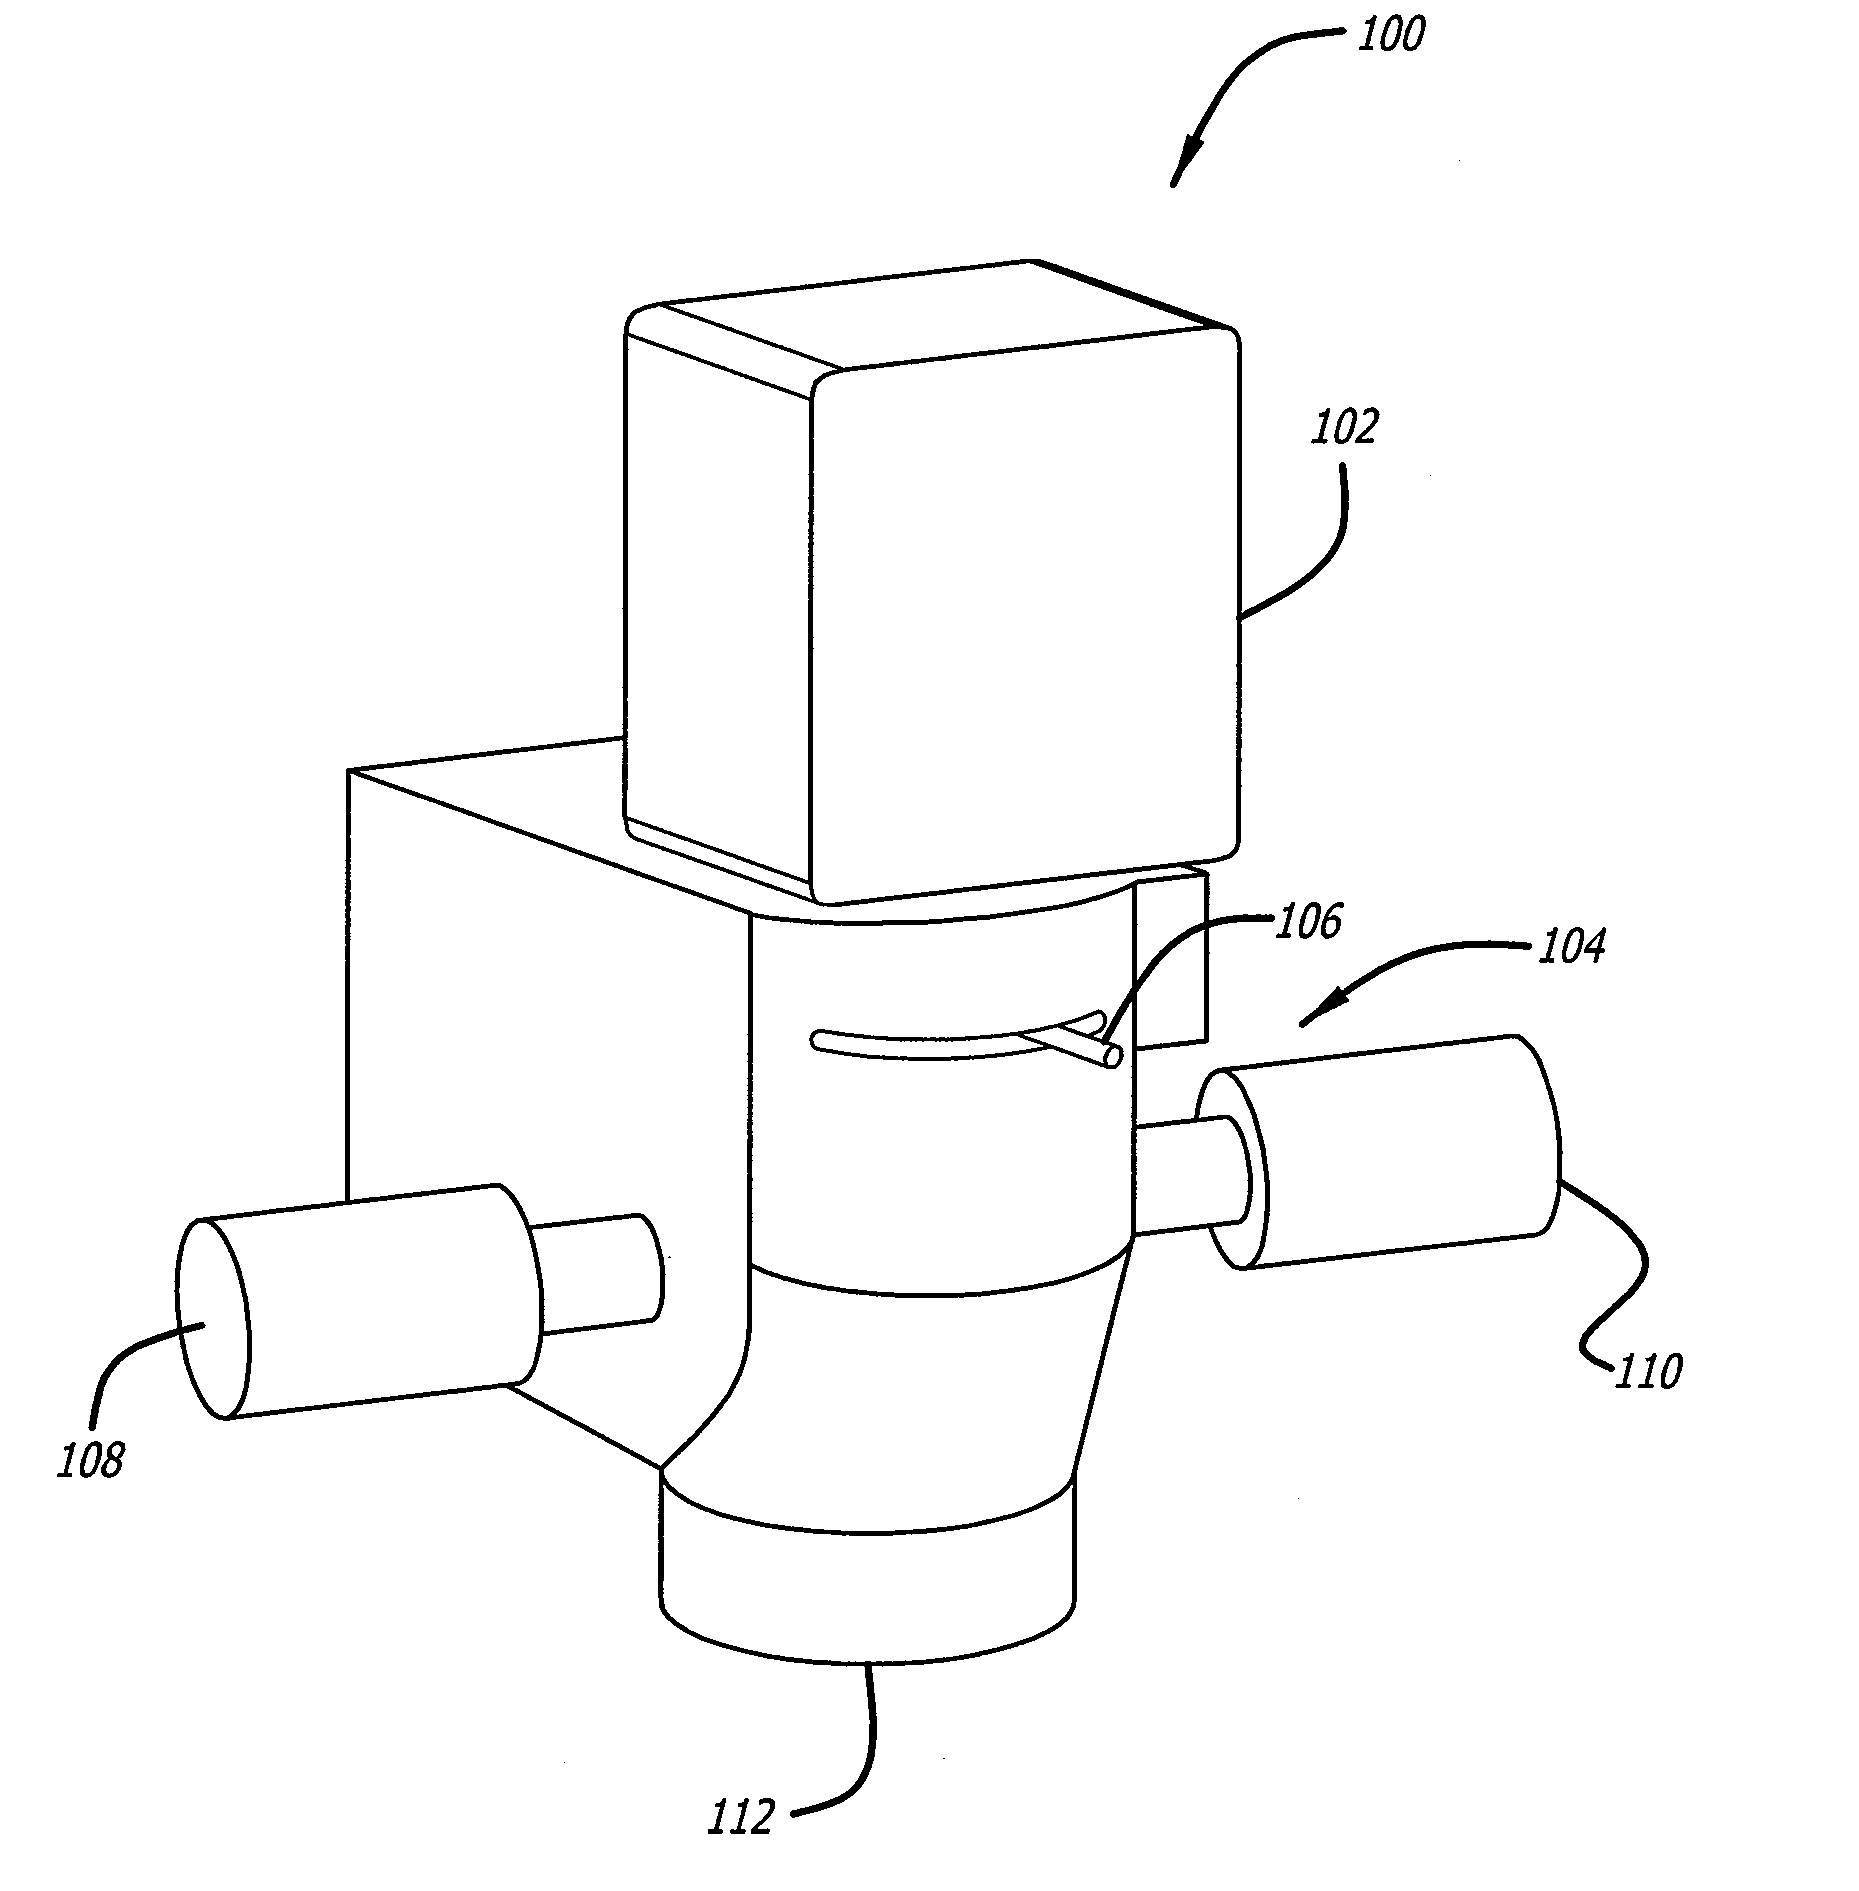 Apparatus and methods for performing enhanced visually directed procedures under low ambient light conditions